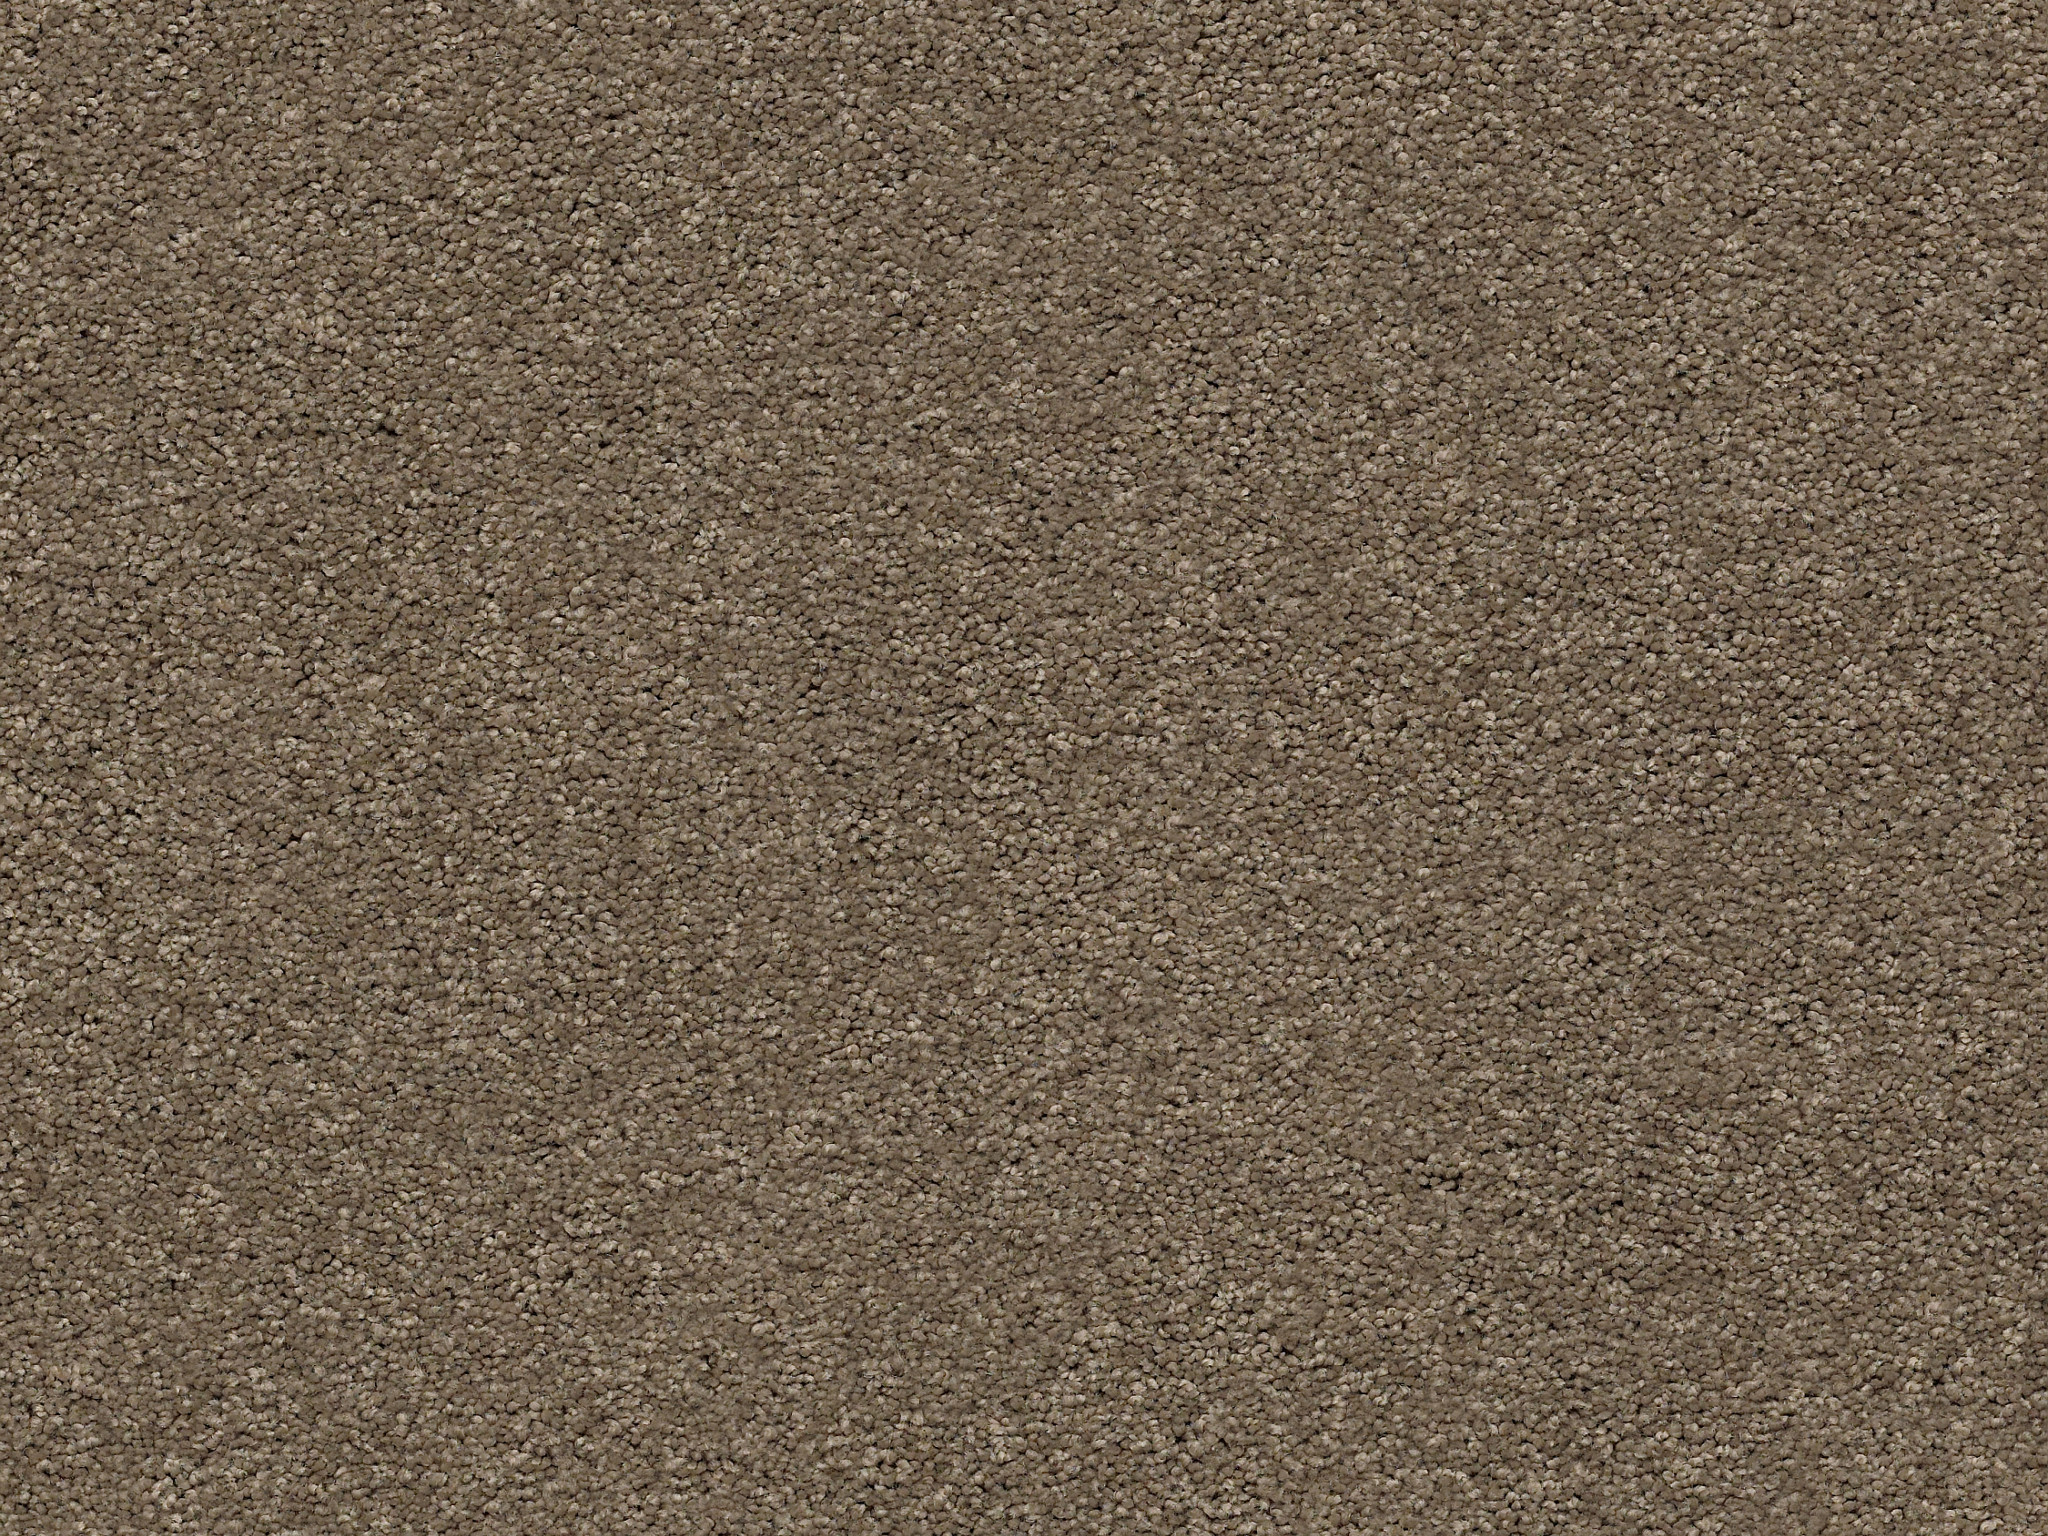 First Act Carpet - Rockport Zoomed Swatch Image